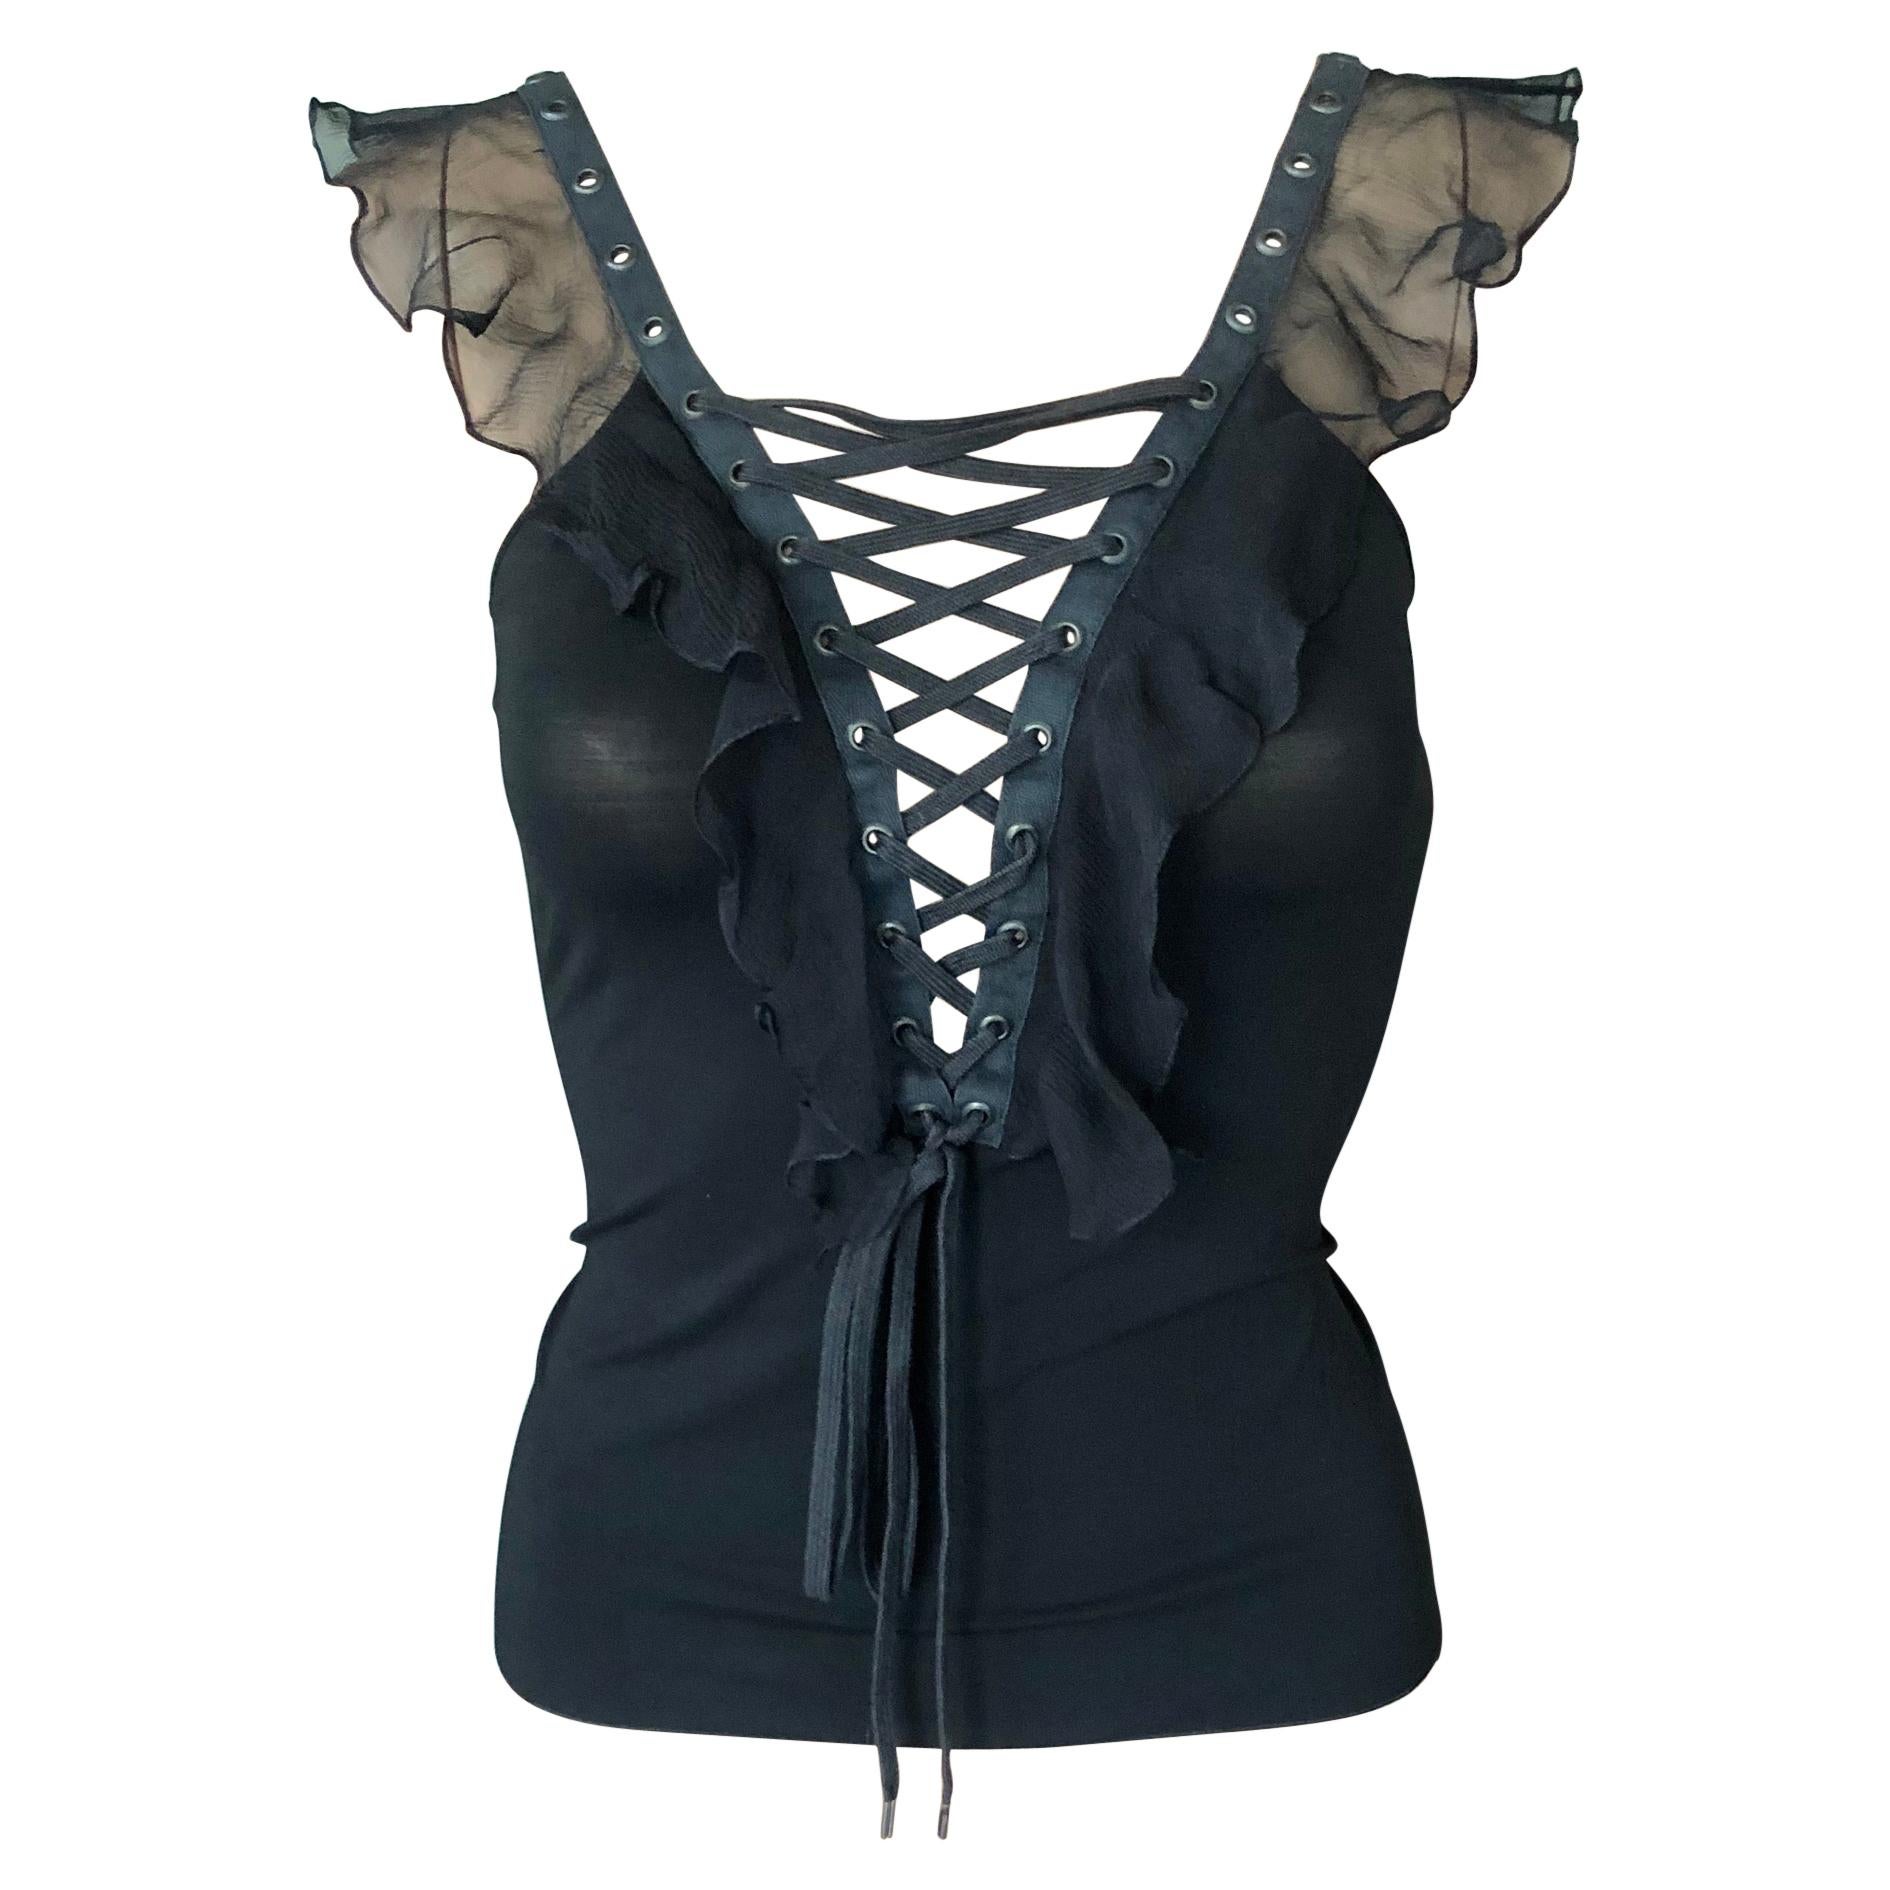 Christian Dior By John Galliano S/S 2003 Plunging Lace Up Tie Up Black Top